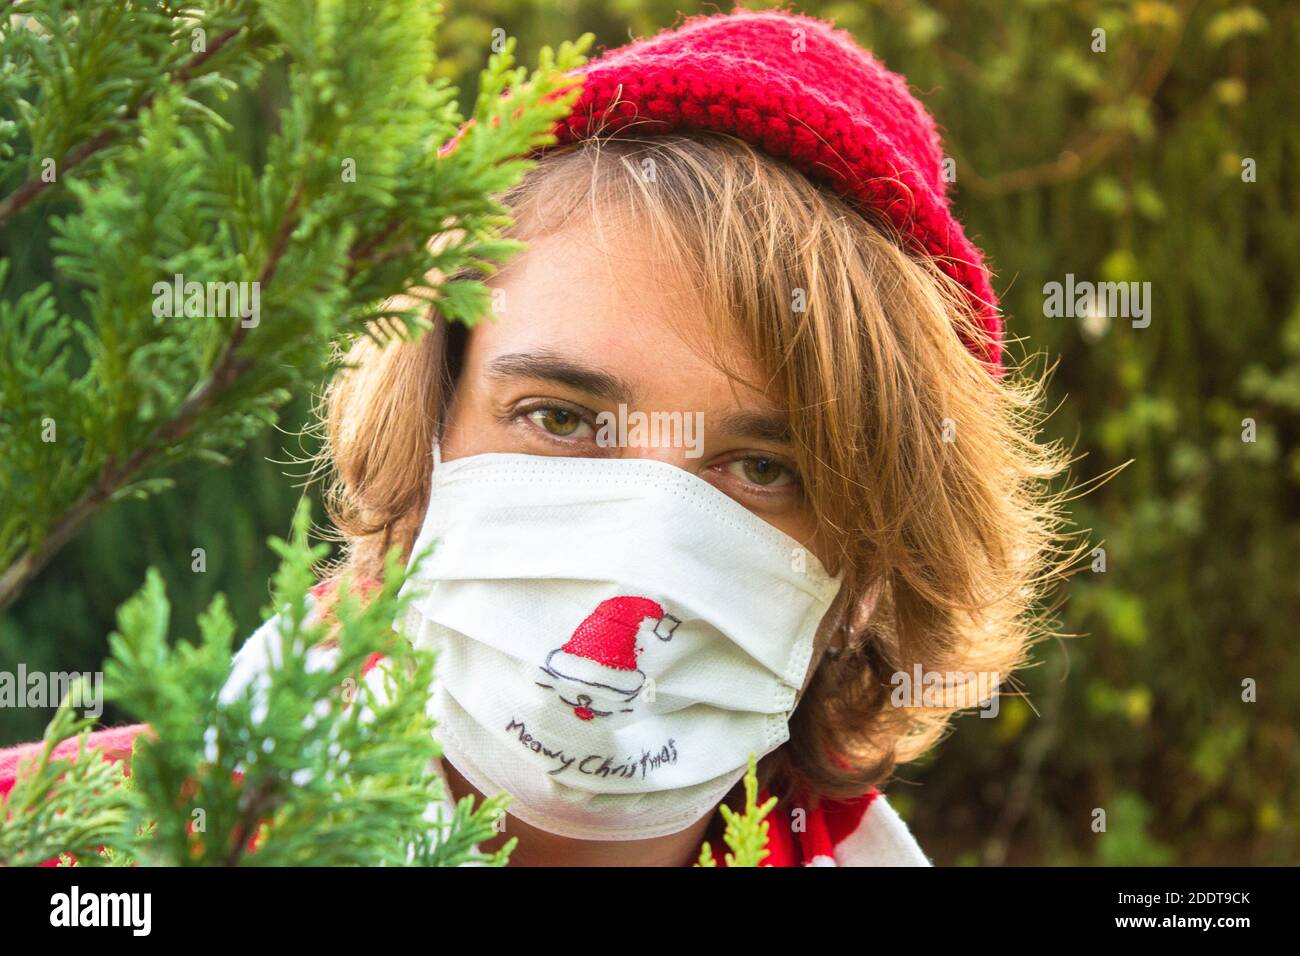 Young man celebrating Christmas with protective medical face mask due to covid-19 pandemic. Young man draws santa hat on a face mask and celebrating C Stock Photo